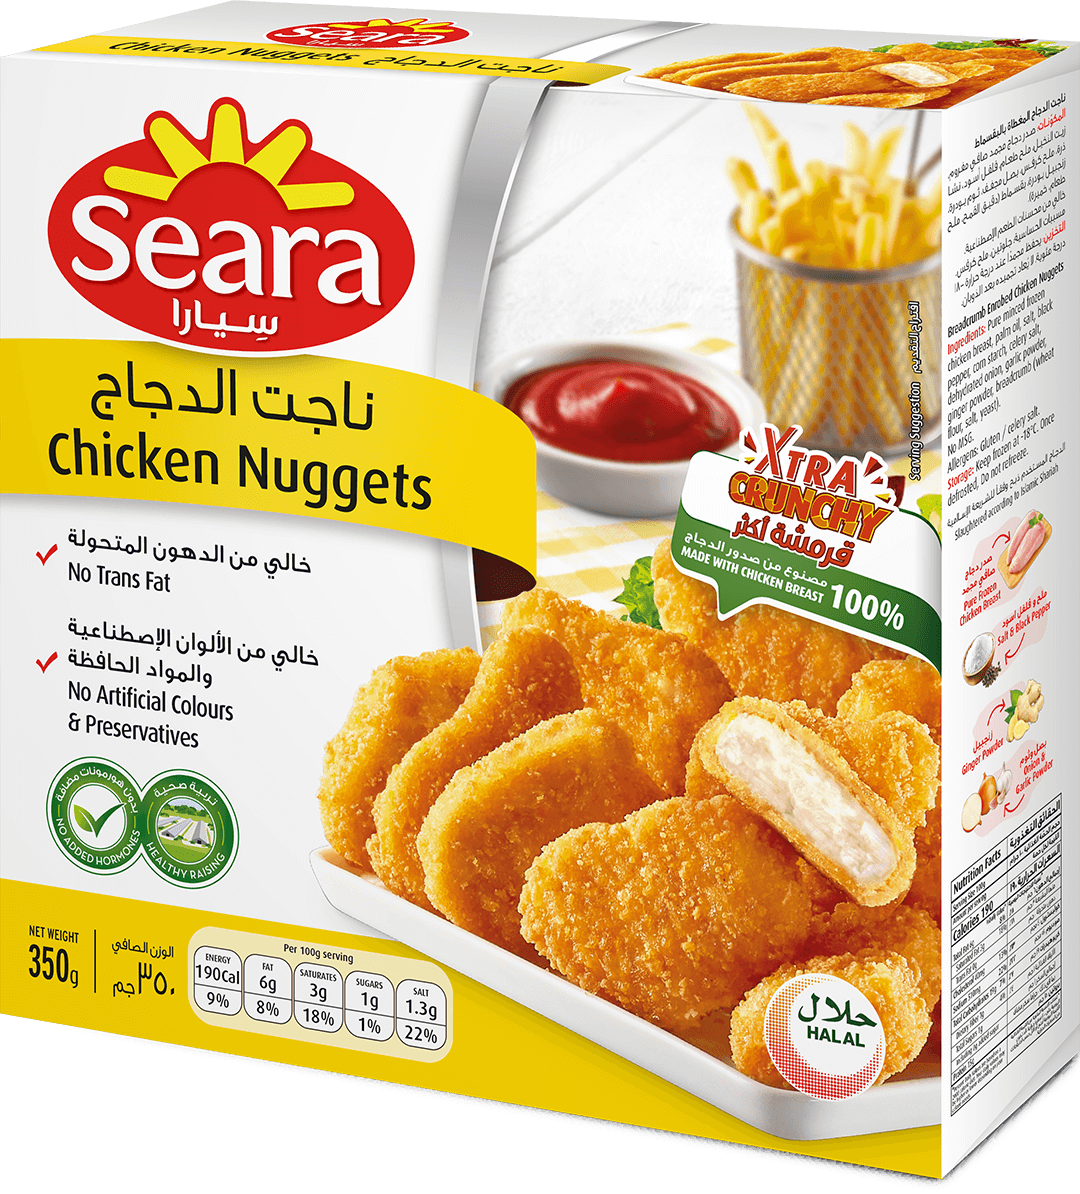 4.2.1.1-Seara-Chicken-Nuggets-350g-Front.png